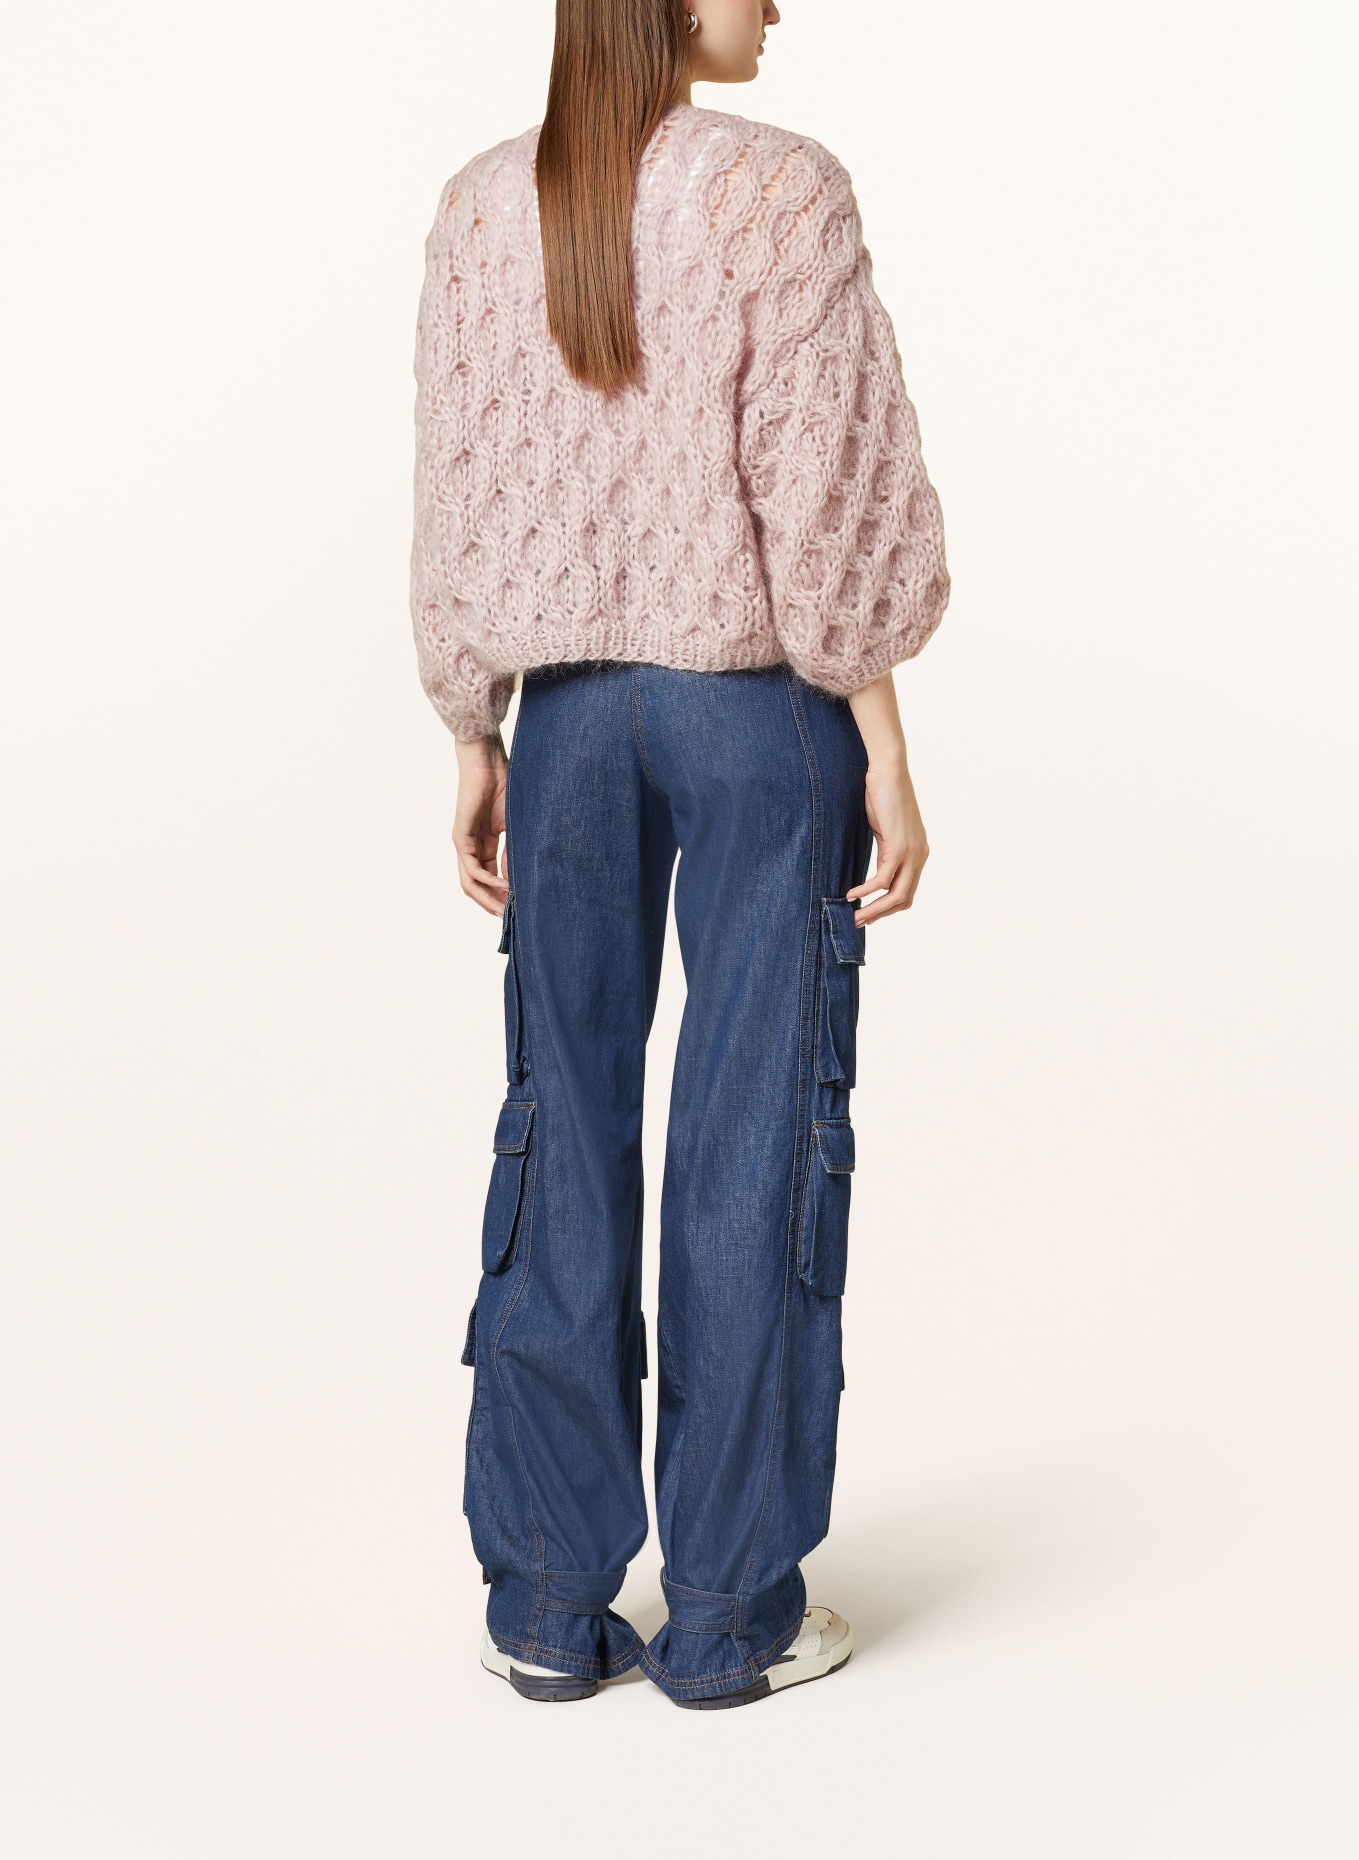 MAIAMI Knit cardigan made of mohair, Color: ROSE (Image 3)